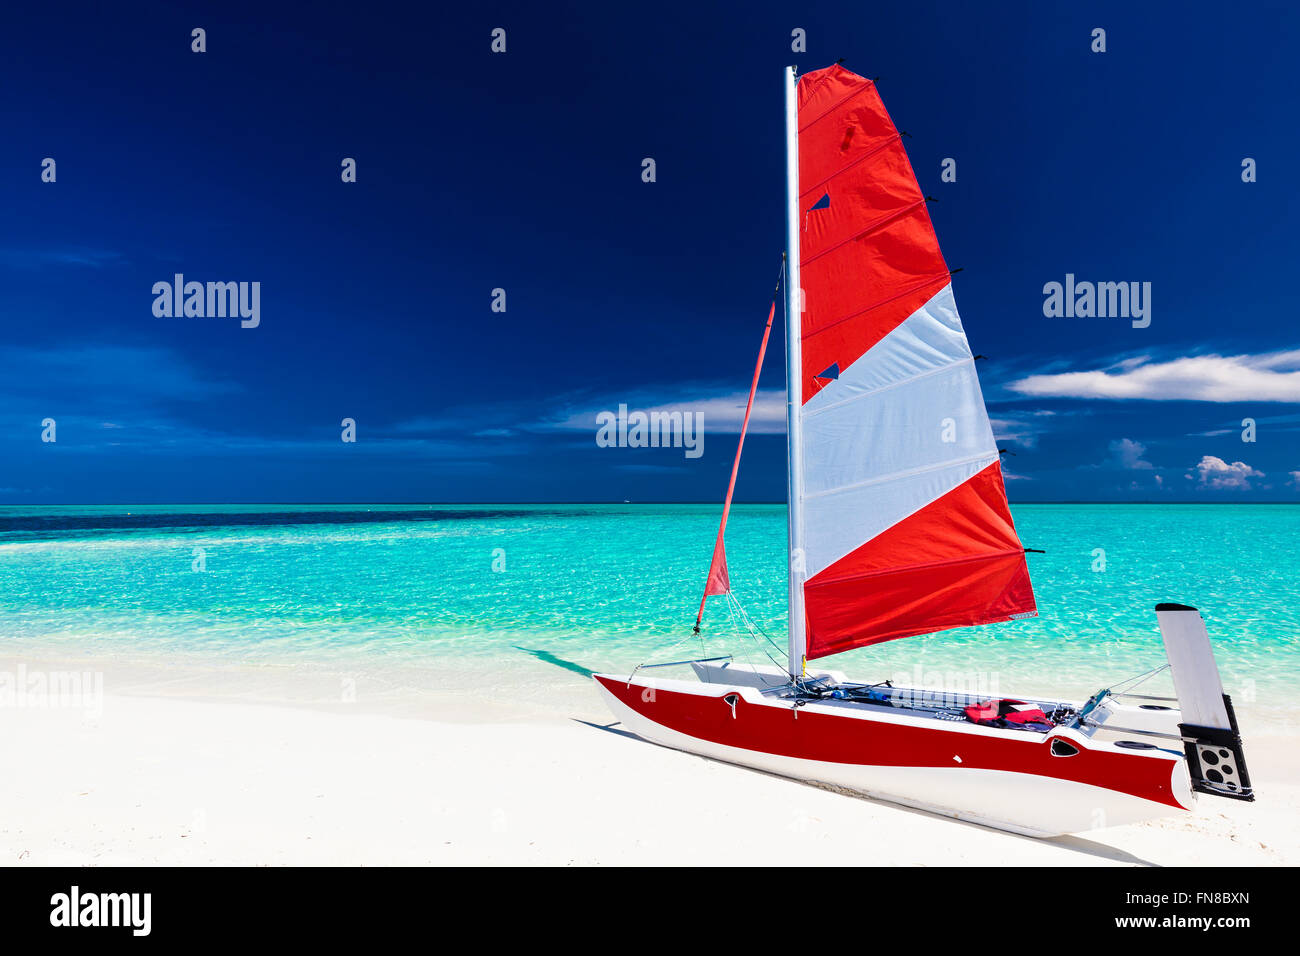 Sailing boat with red sail on a beach of deserted tropical island with shallow blue water Stock Photo